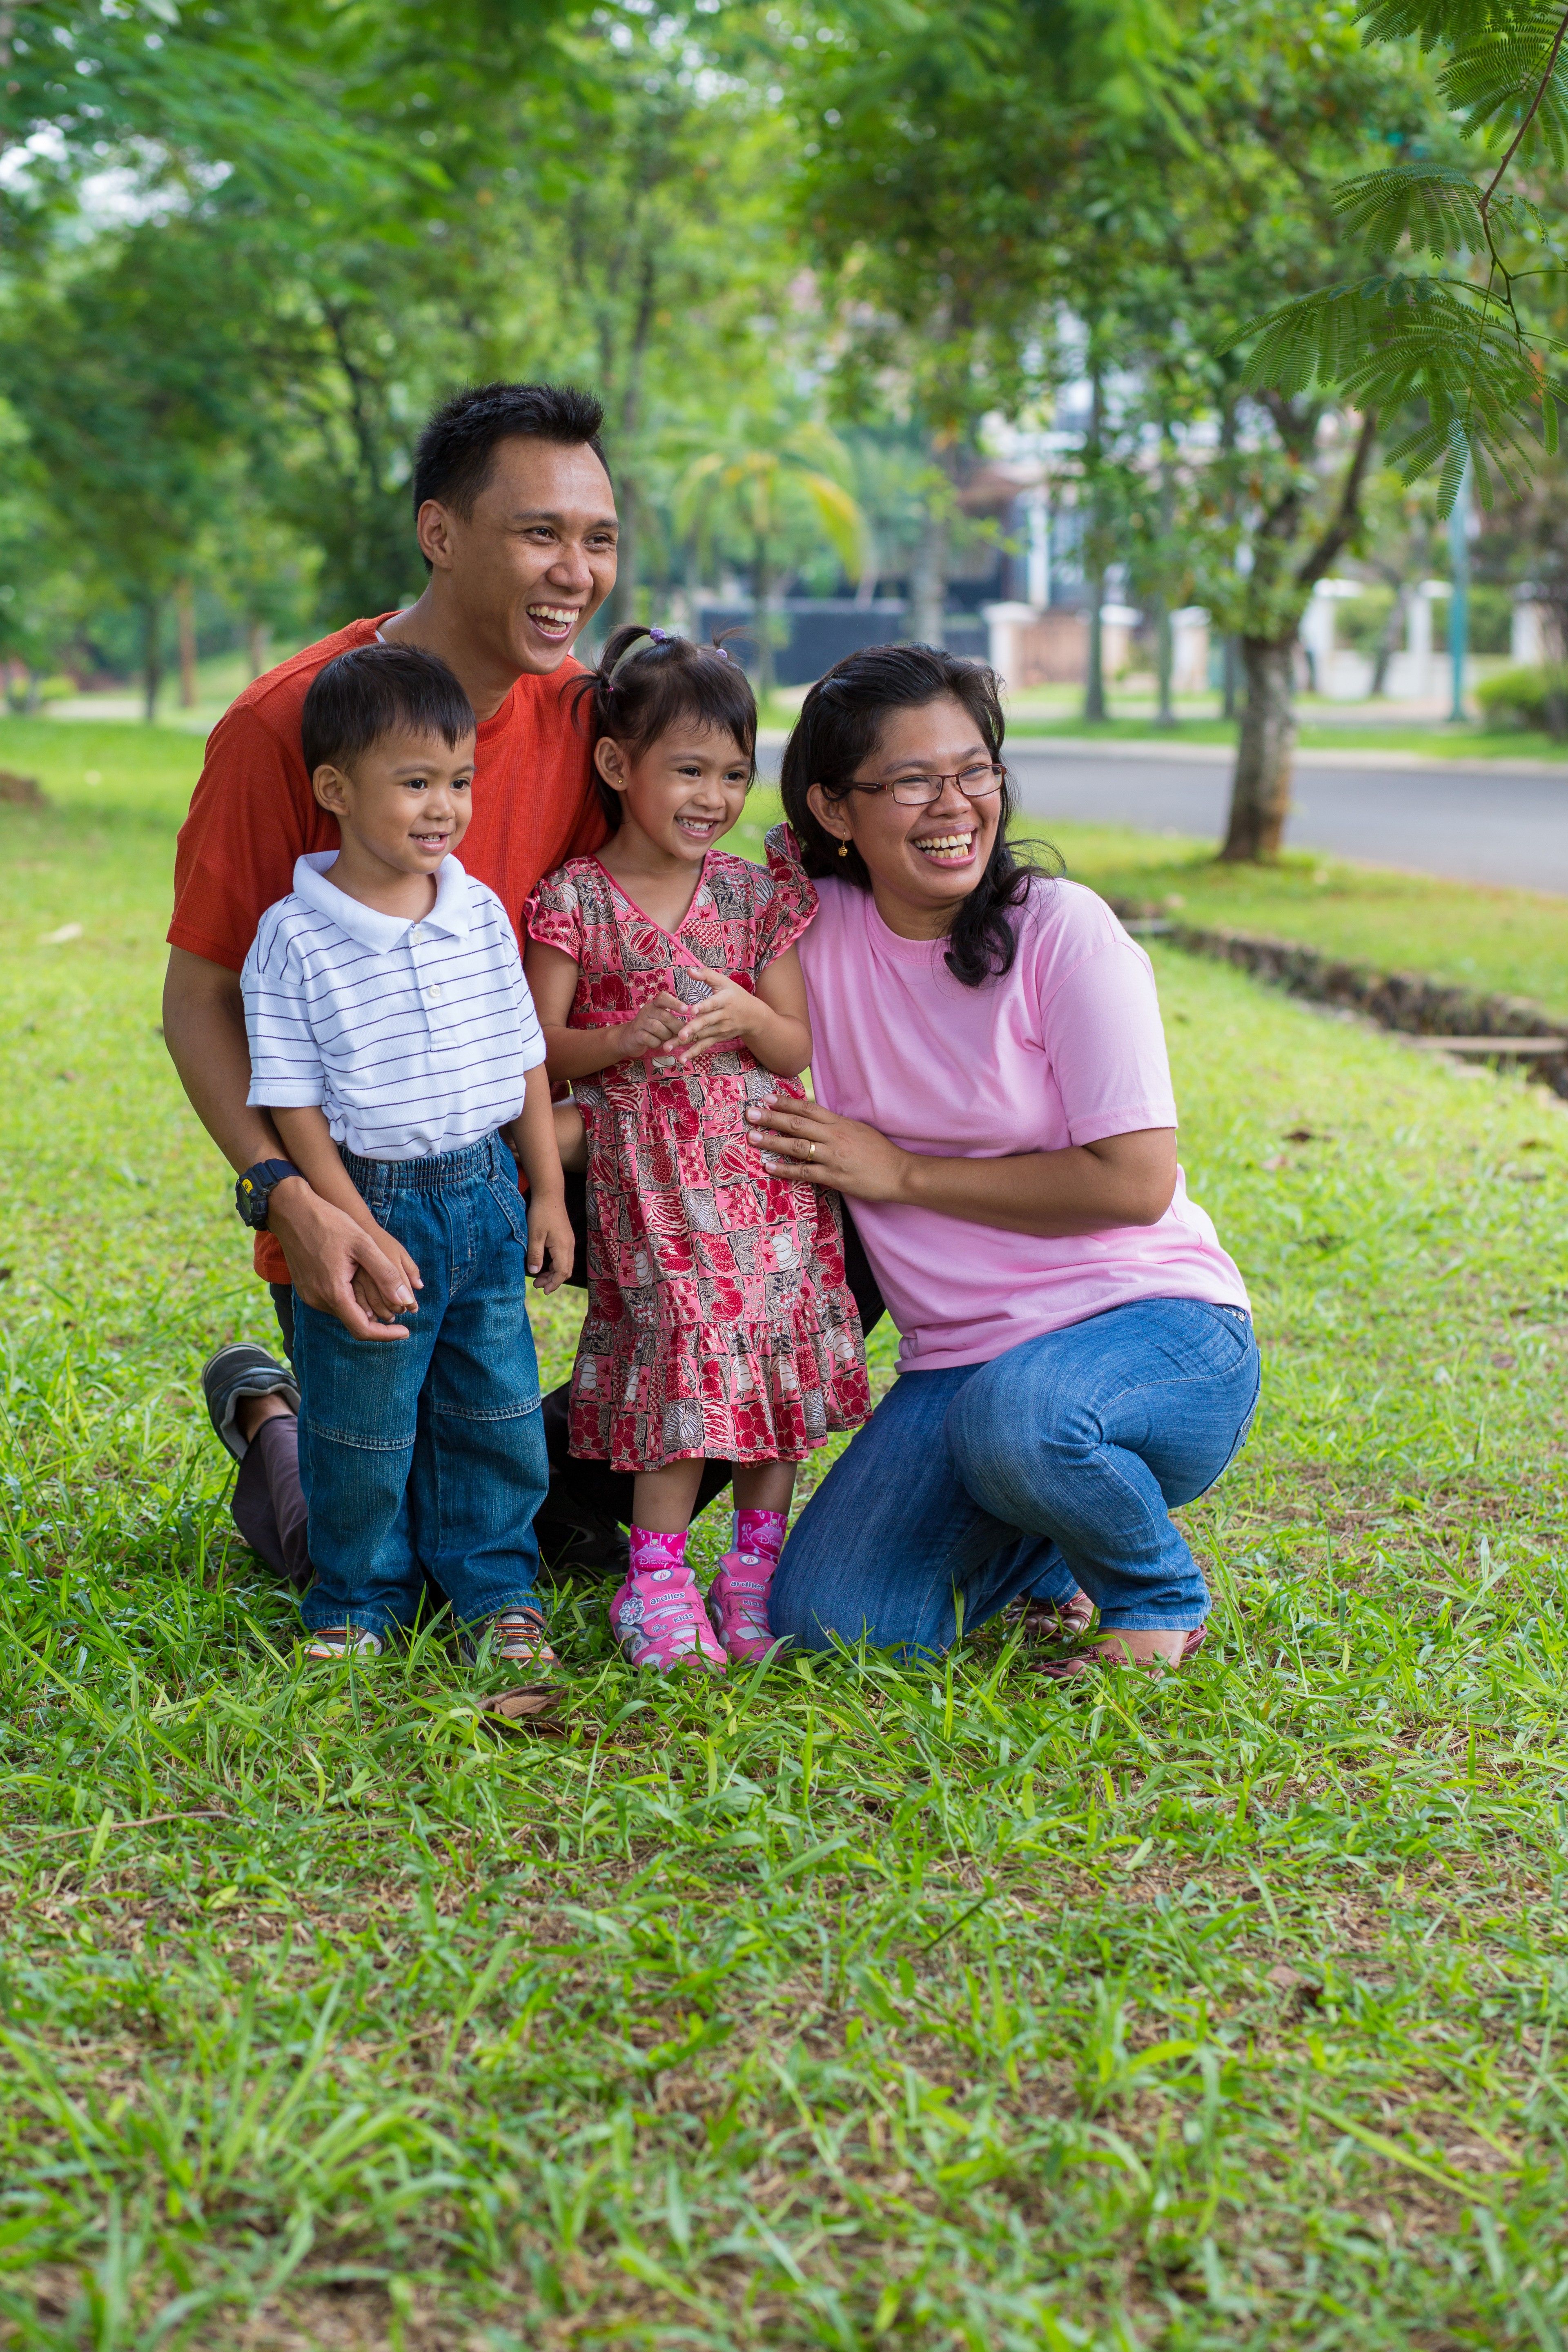 A portrait of a family from Indonesia.